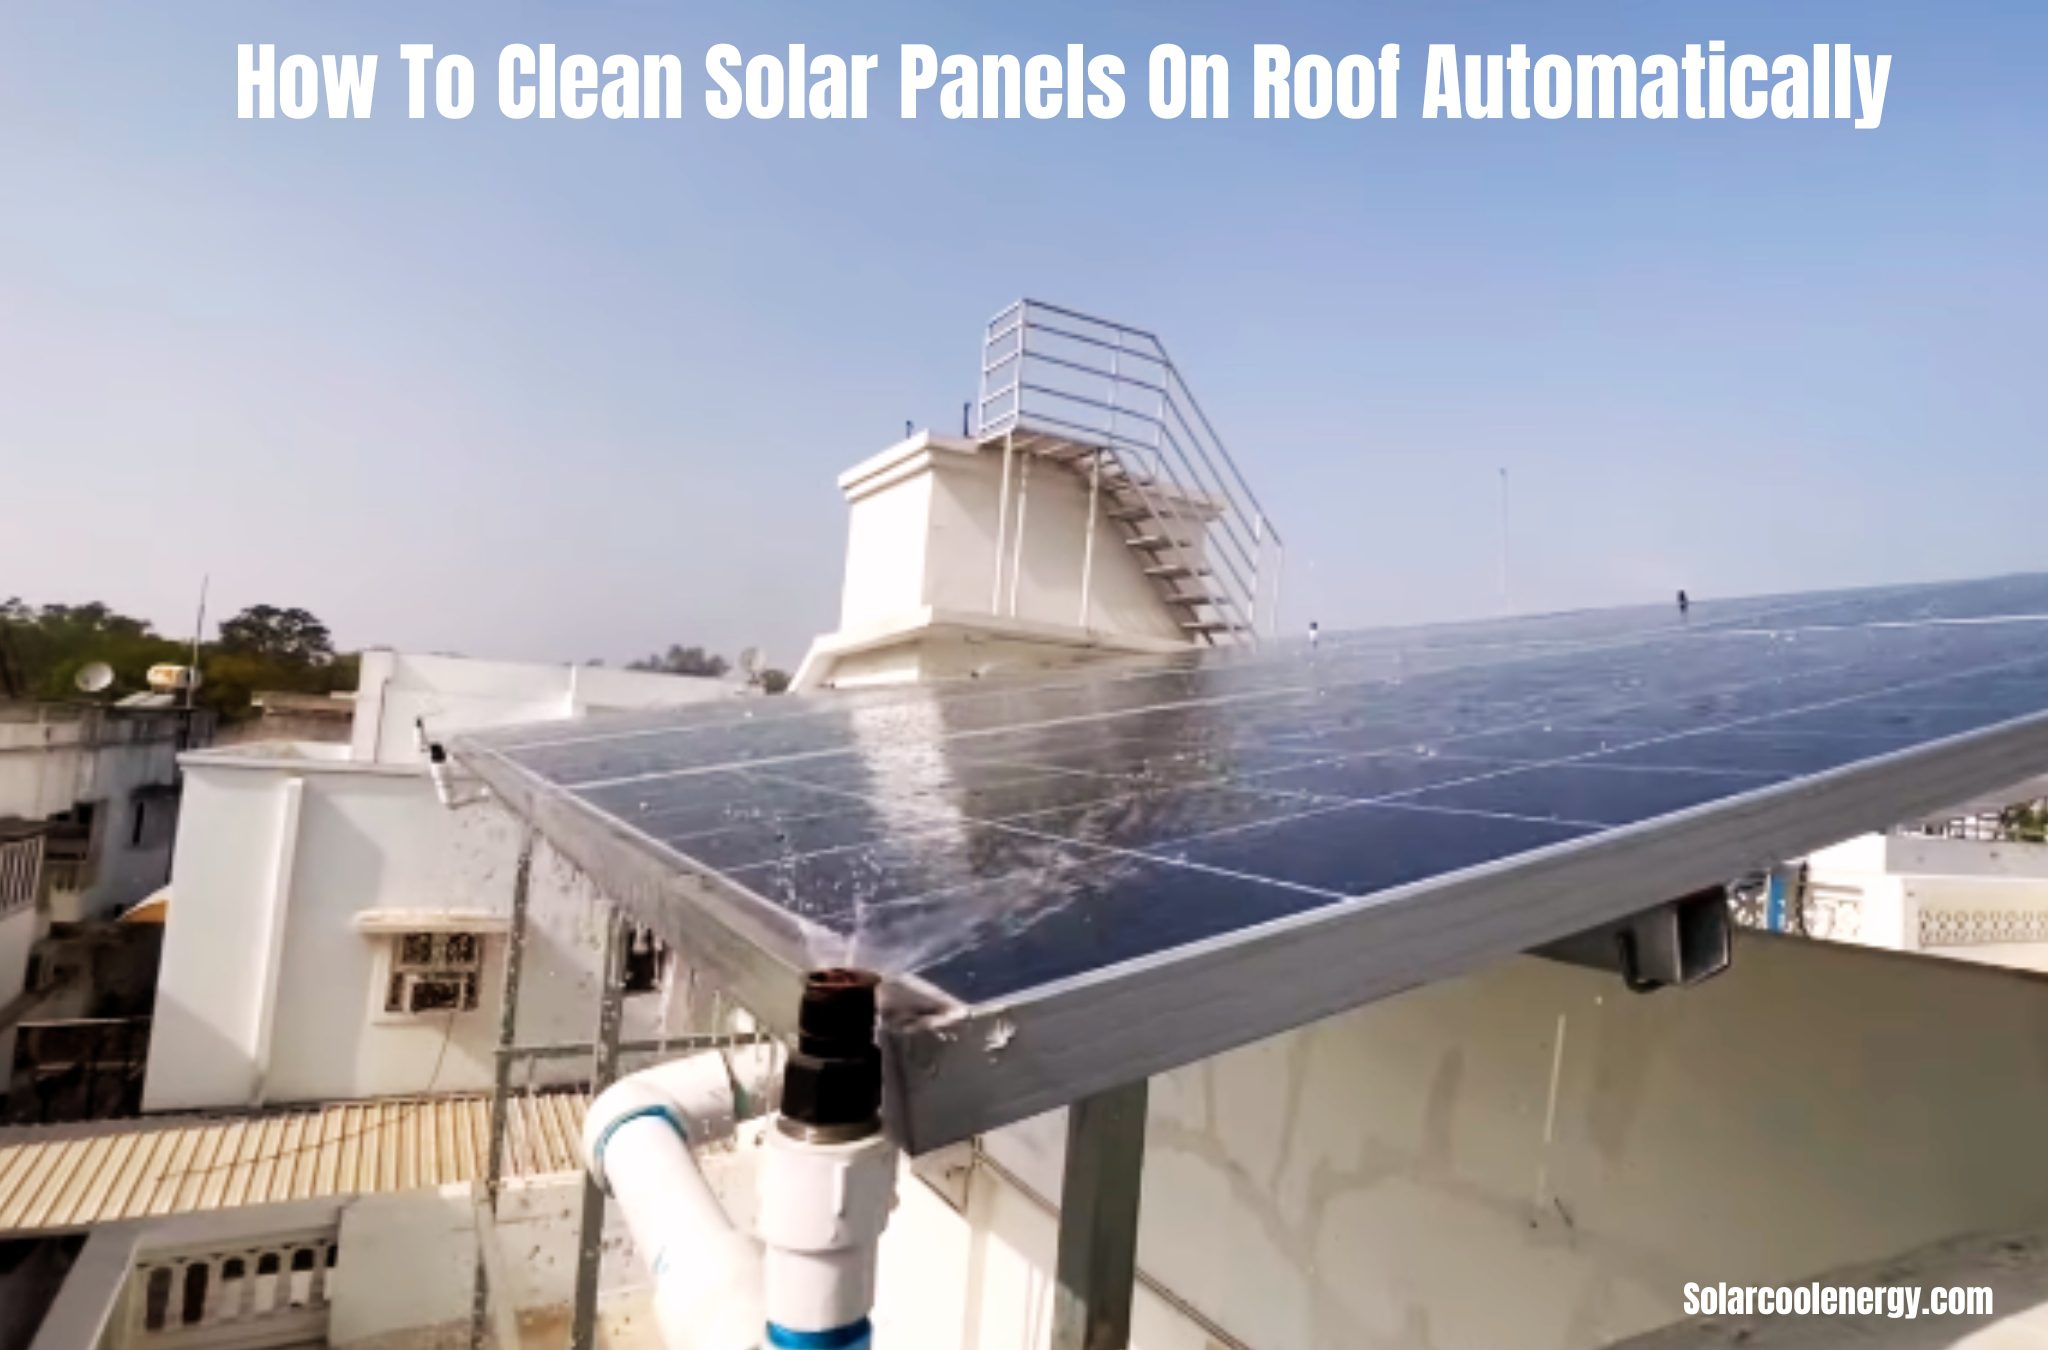 How to Clean Solar Panels on Roof Automatically